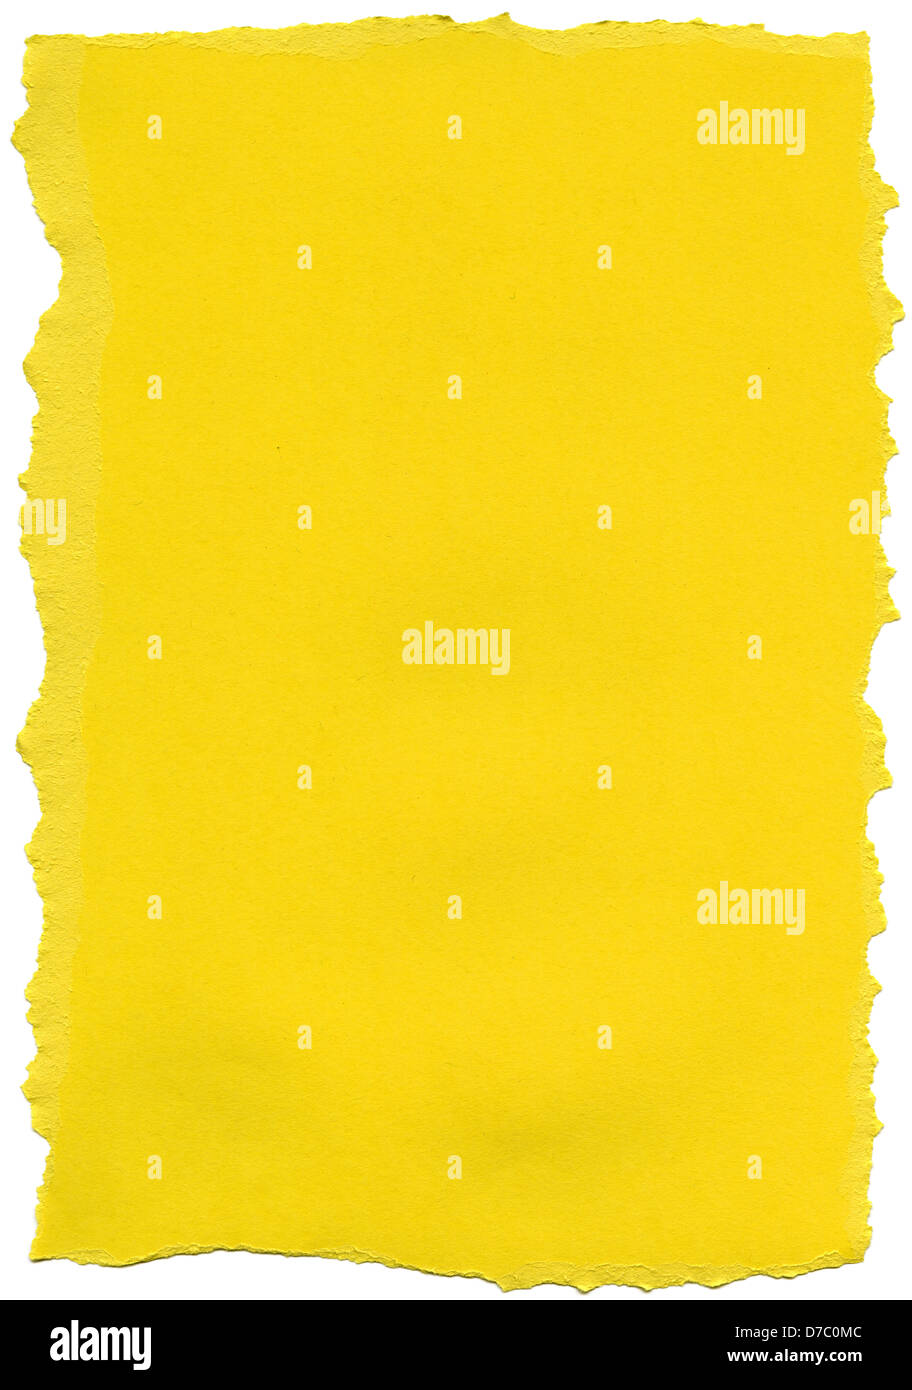 Texture of yellow fiber paper with torn edges. Scanned at 800dpi using a professional Epson V700 scanner. Stock Photo